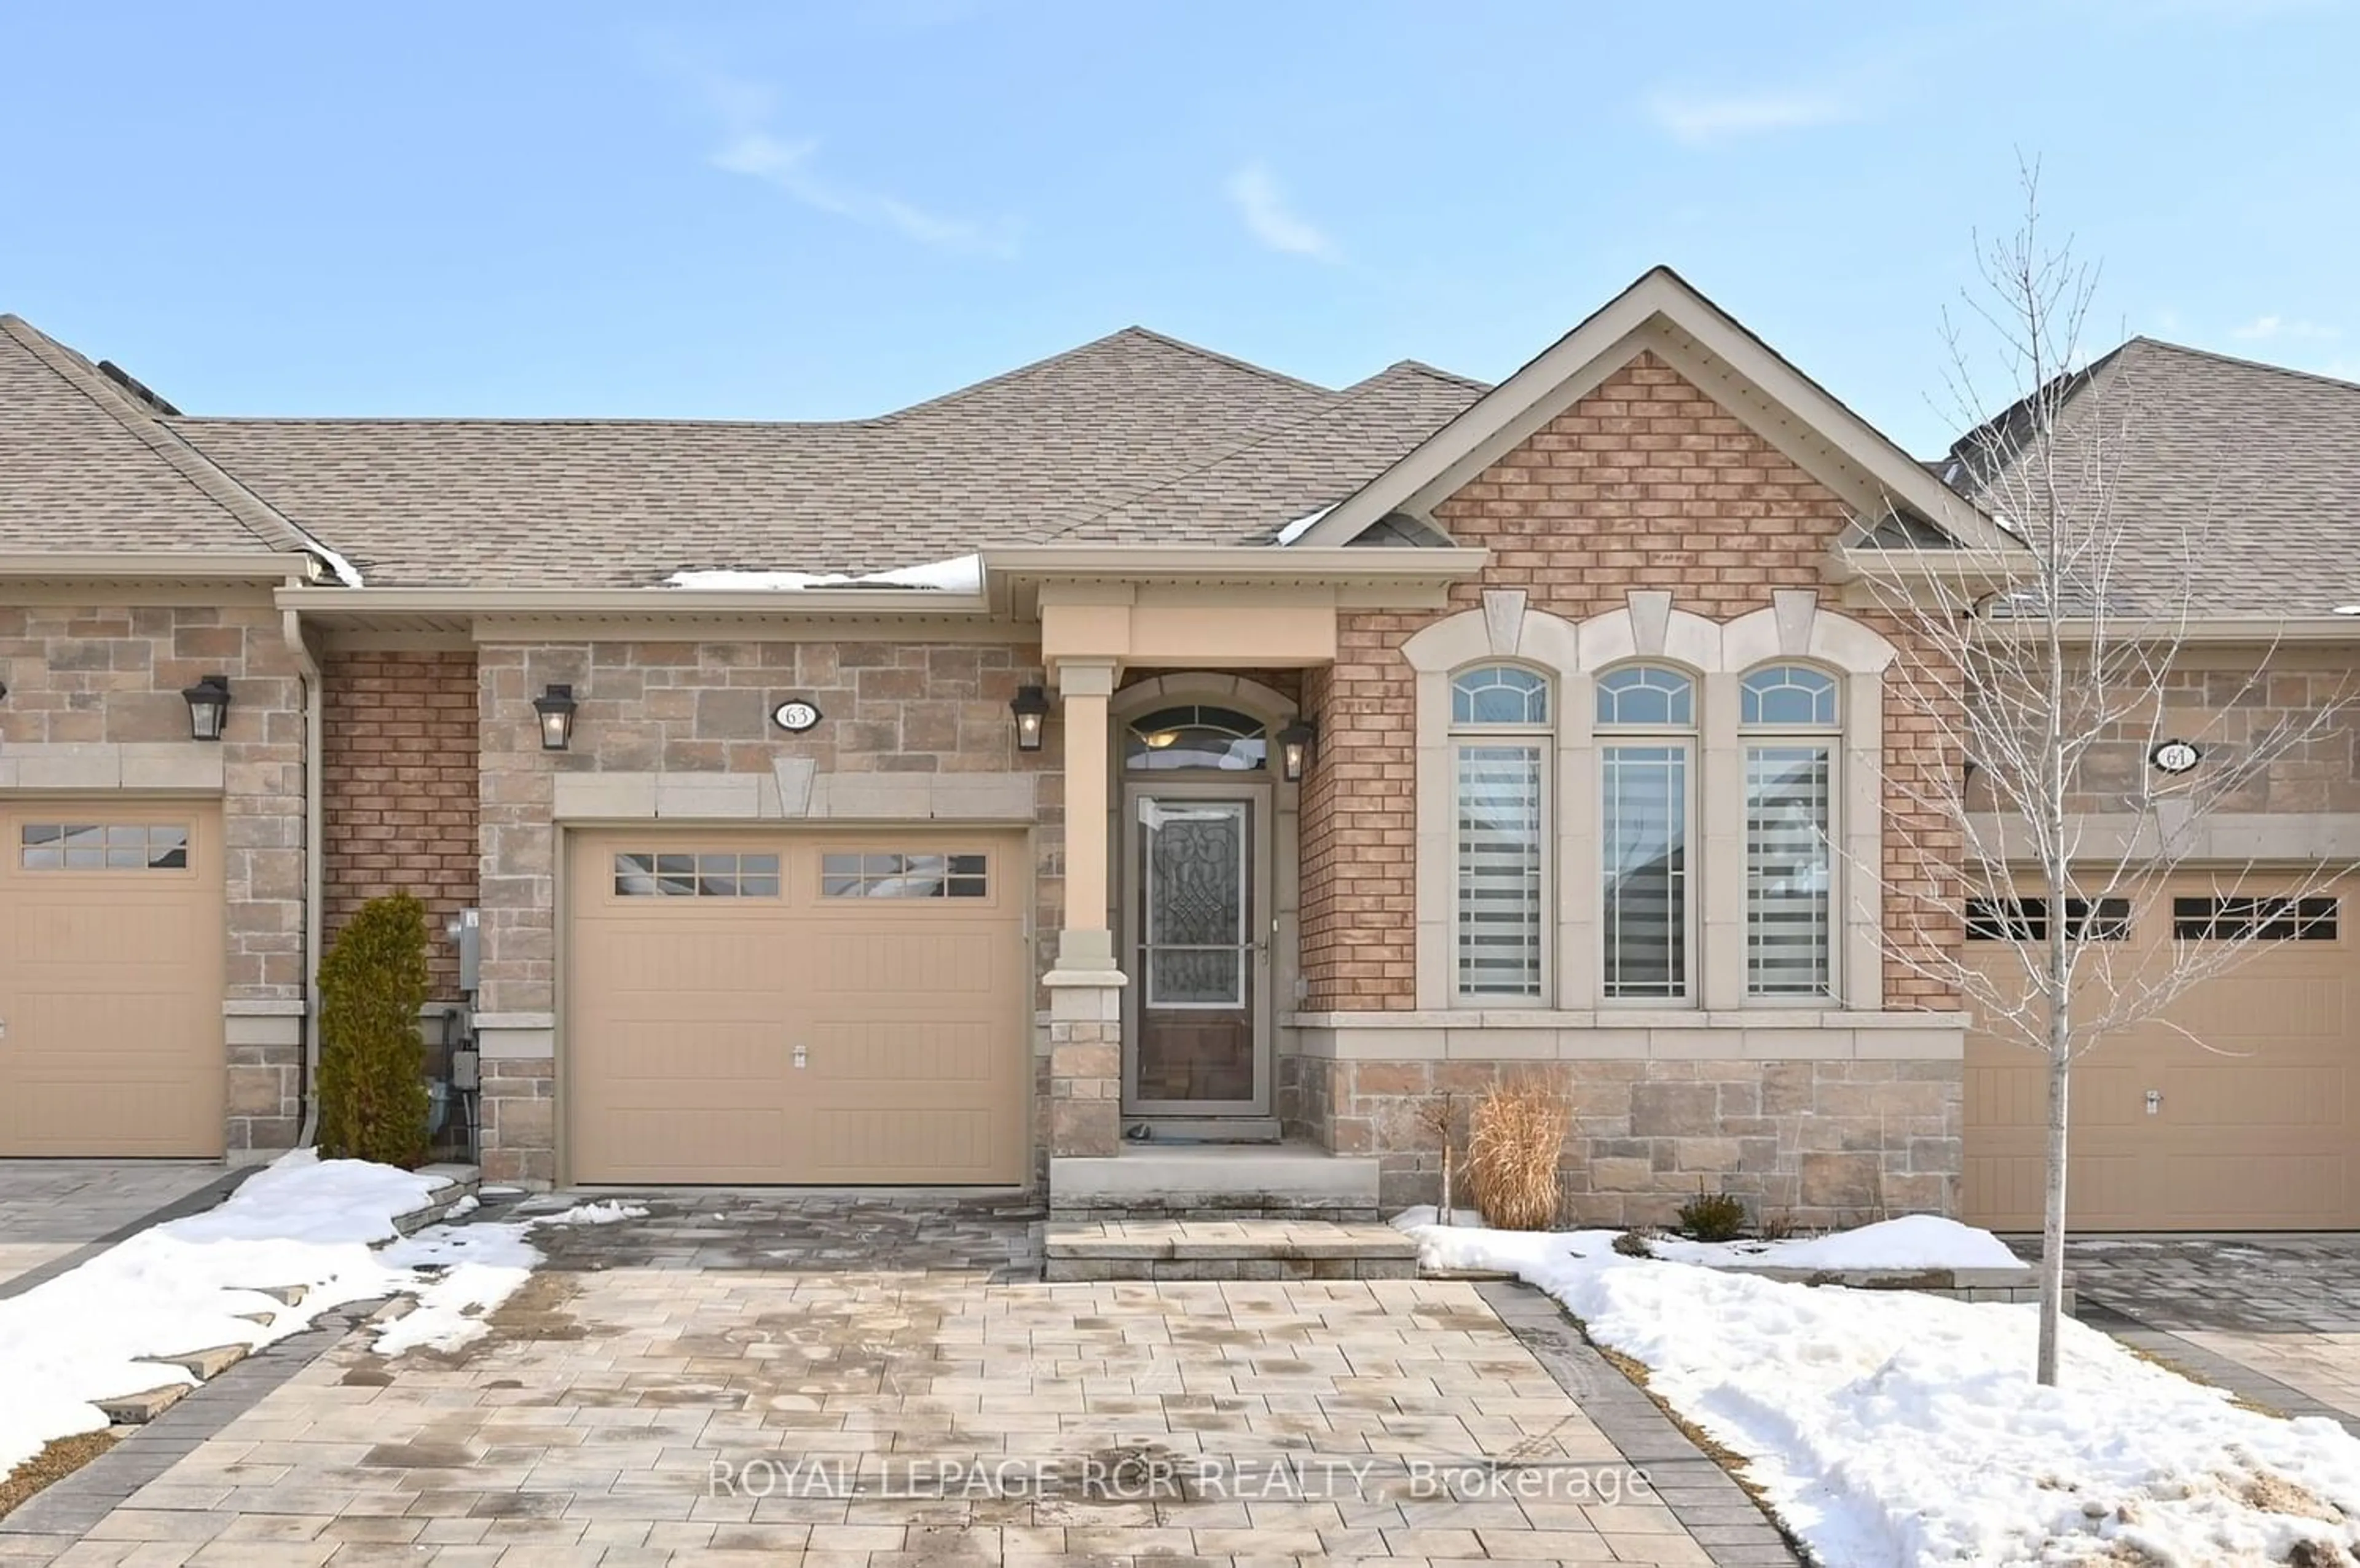 Home with brick exterior material for 63 Summerhill Dr, New Tecumseth Ontario L9R 0S8